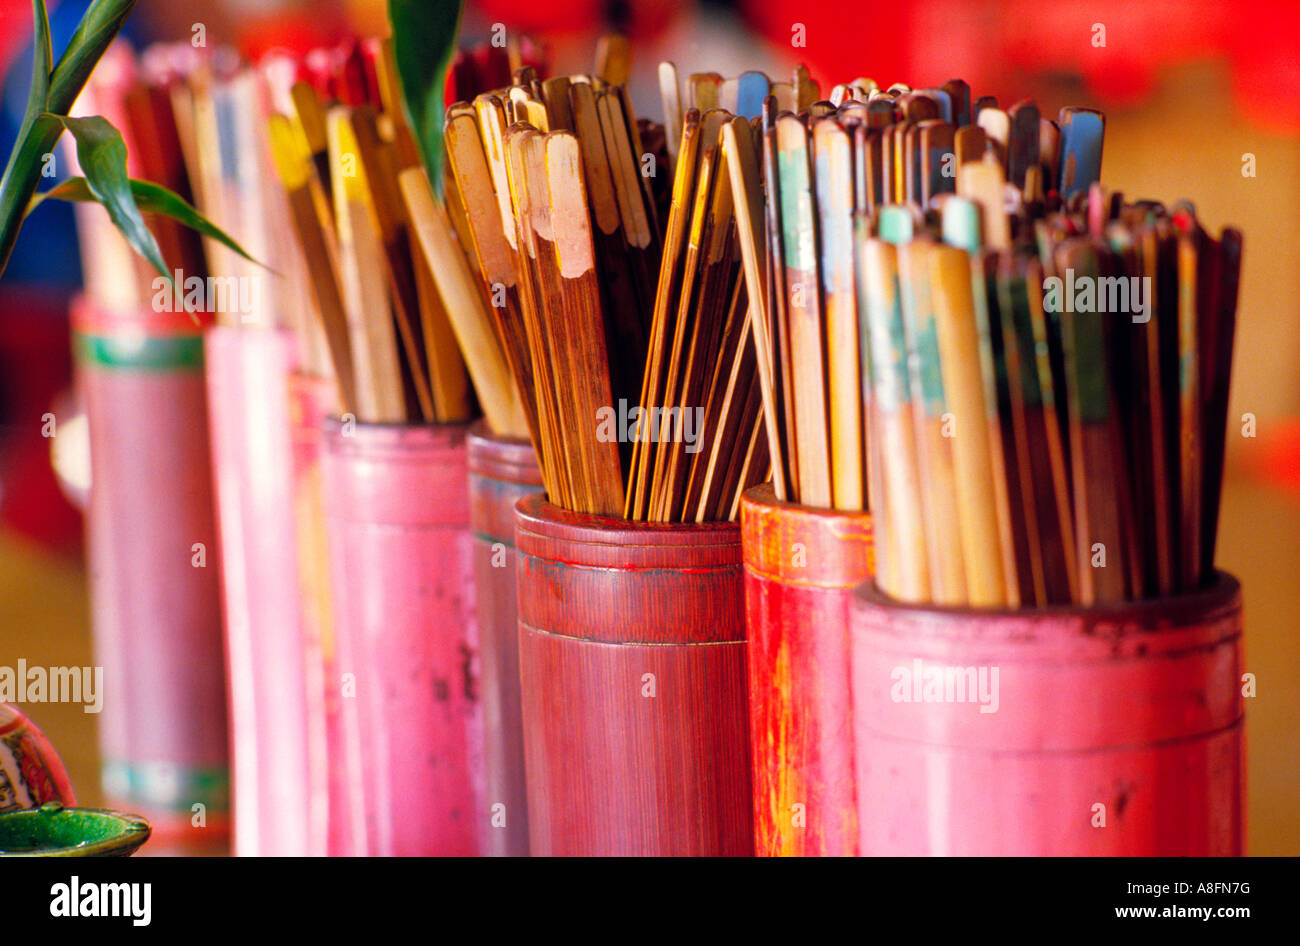 CHIM bamboo slips used for drawing lots or divination in temple Hong Kong China Stock Photo